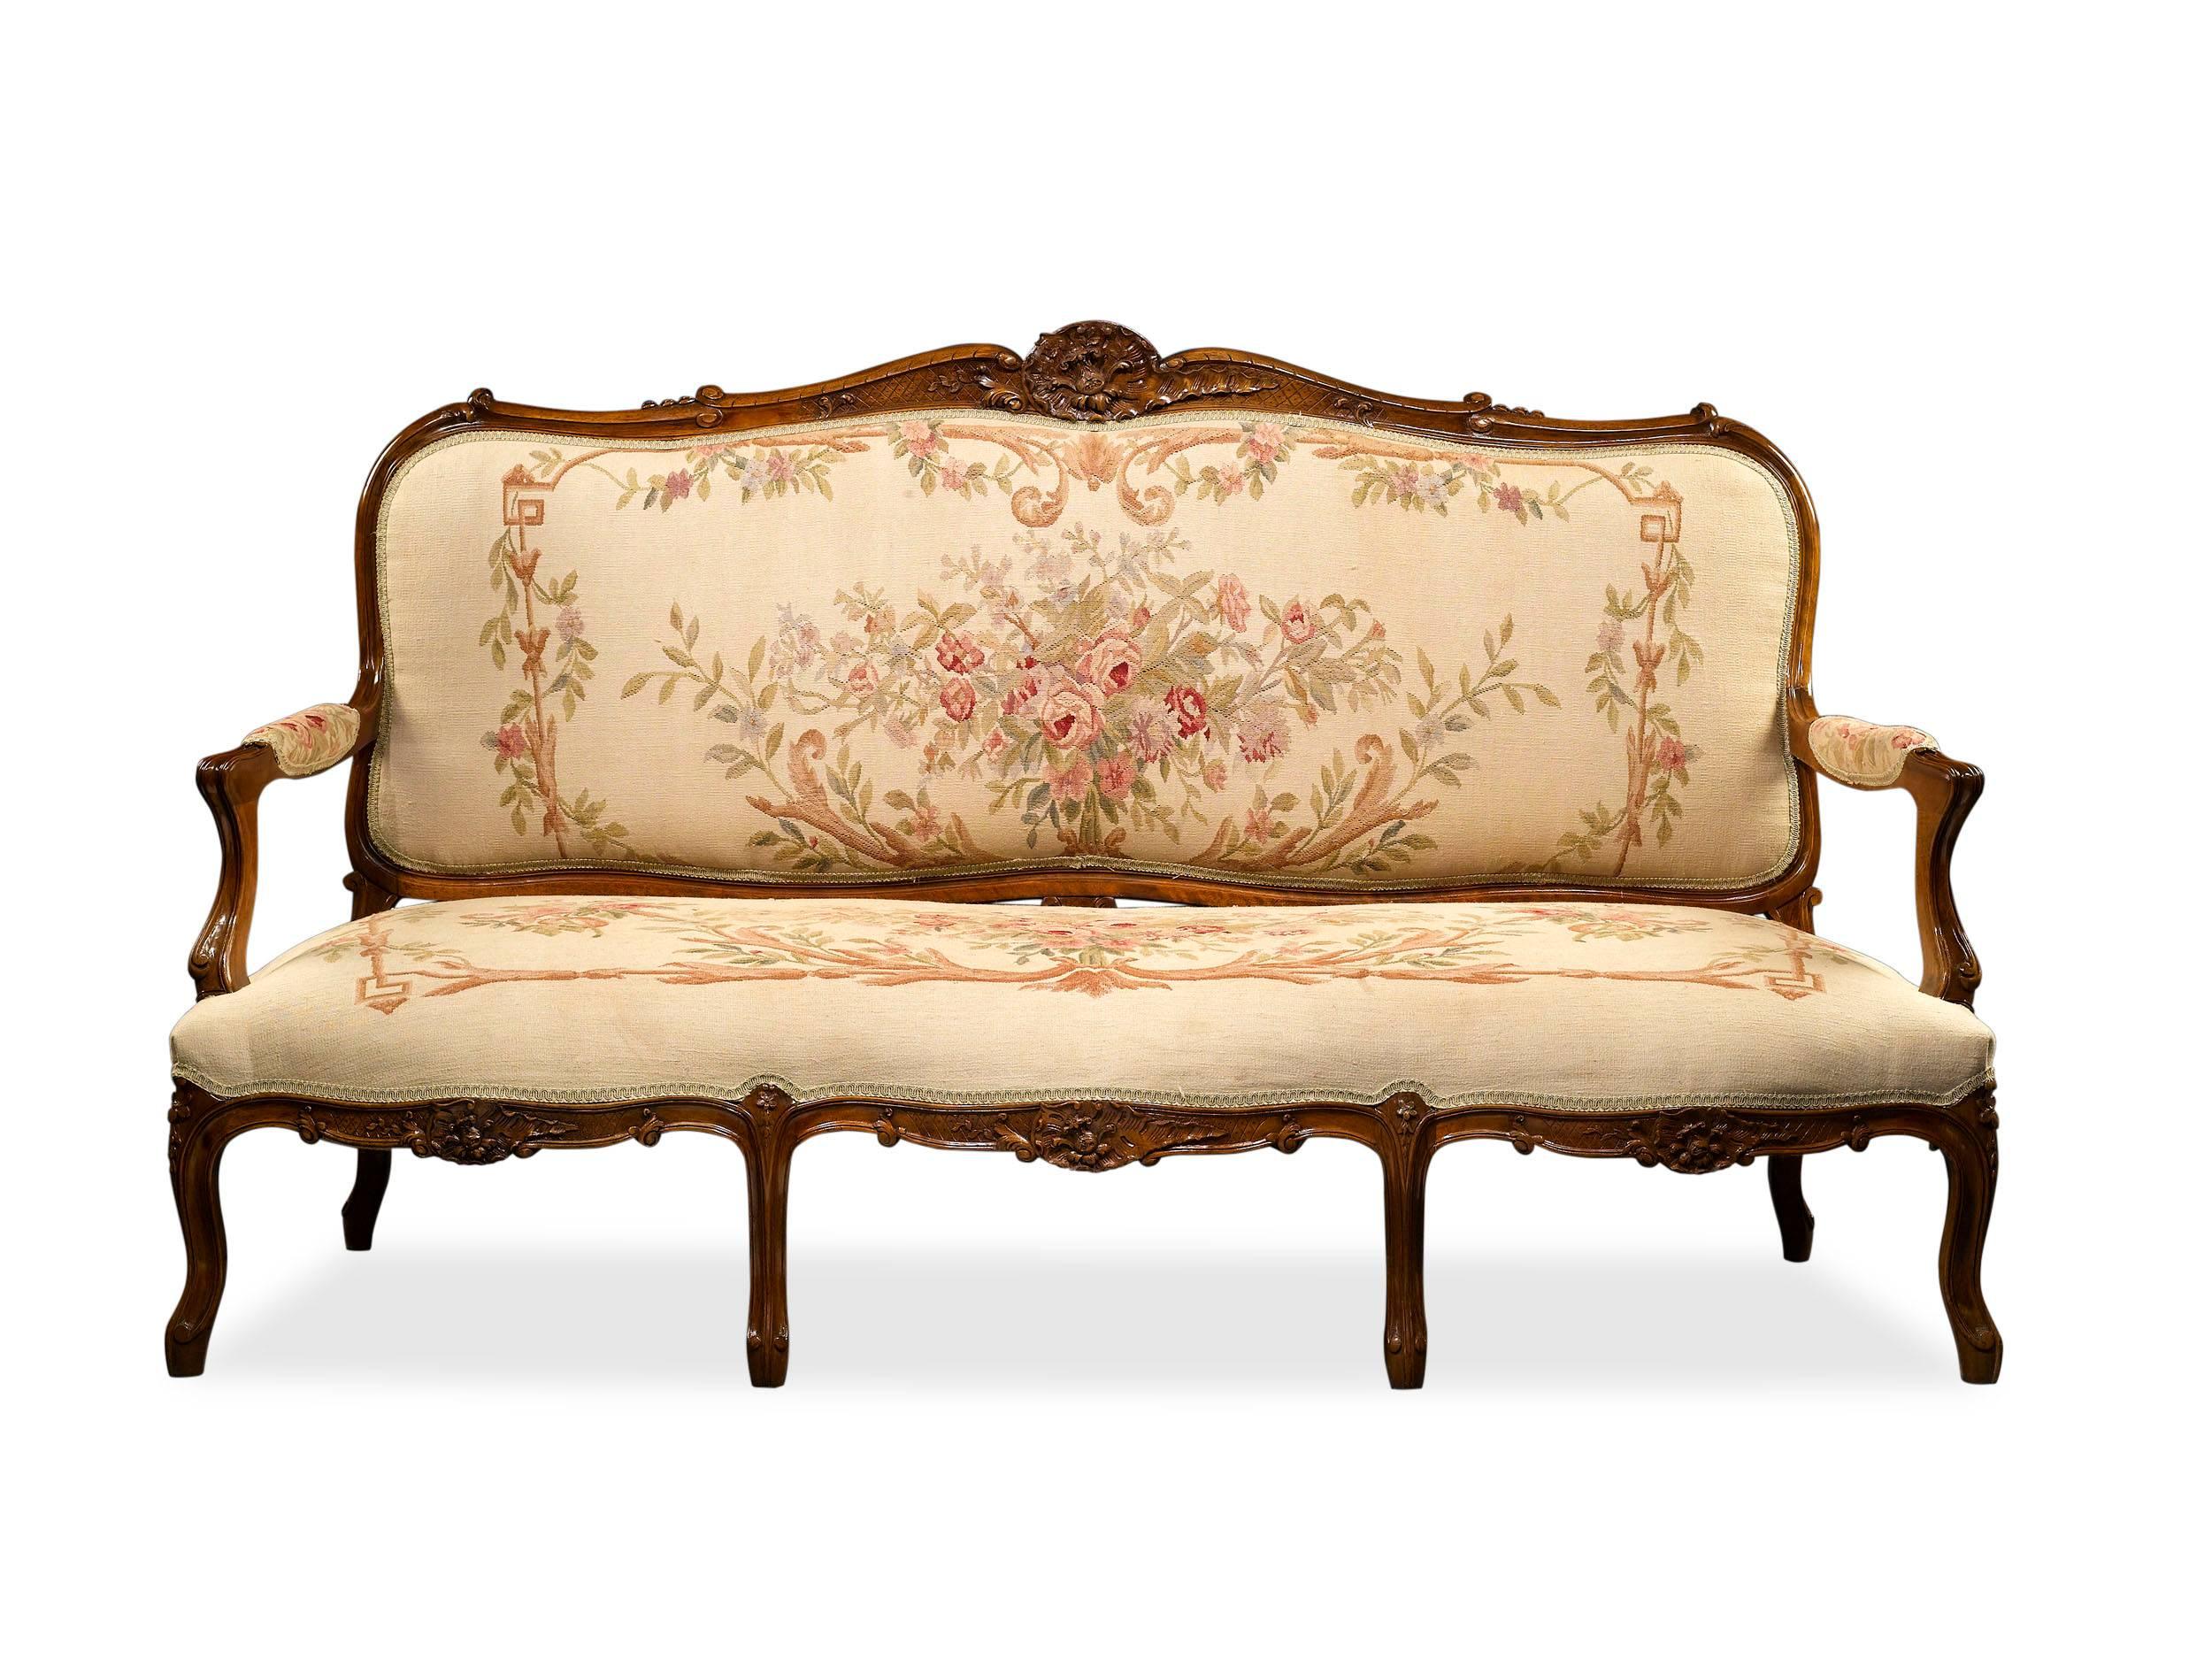 A magnificent five-piece carved walnut parlor suite in the Louis XV-style richly upholstered in exceptional and rare handwoven Aubusson tapestries. The set includes two armchairs, two side chairs and a canapé each finely carved with Rococo